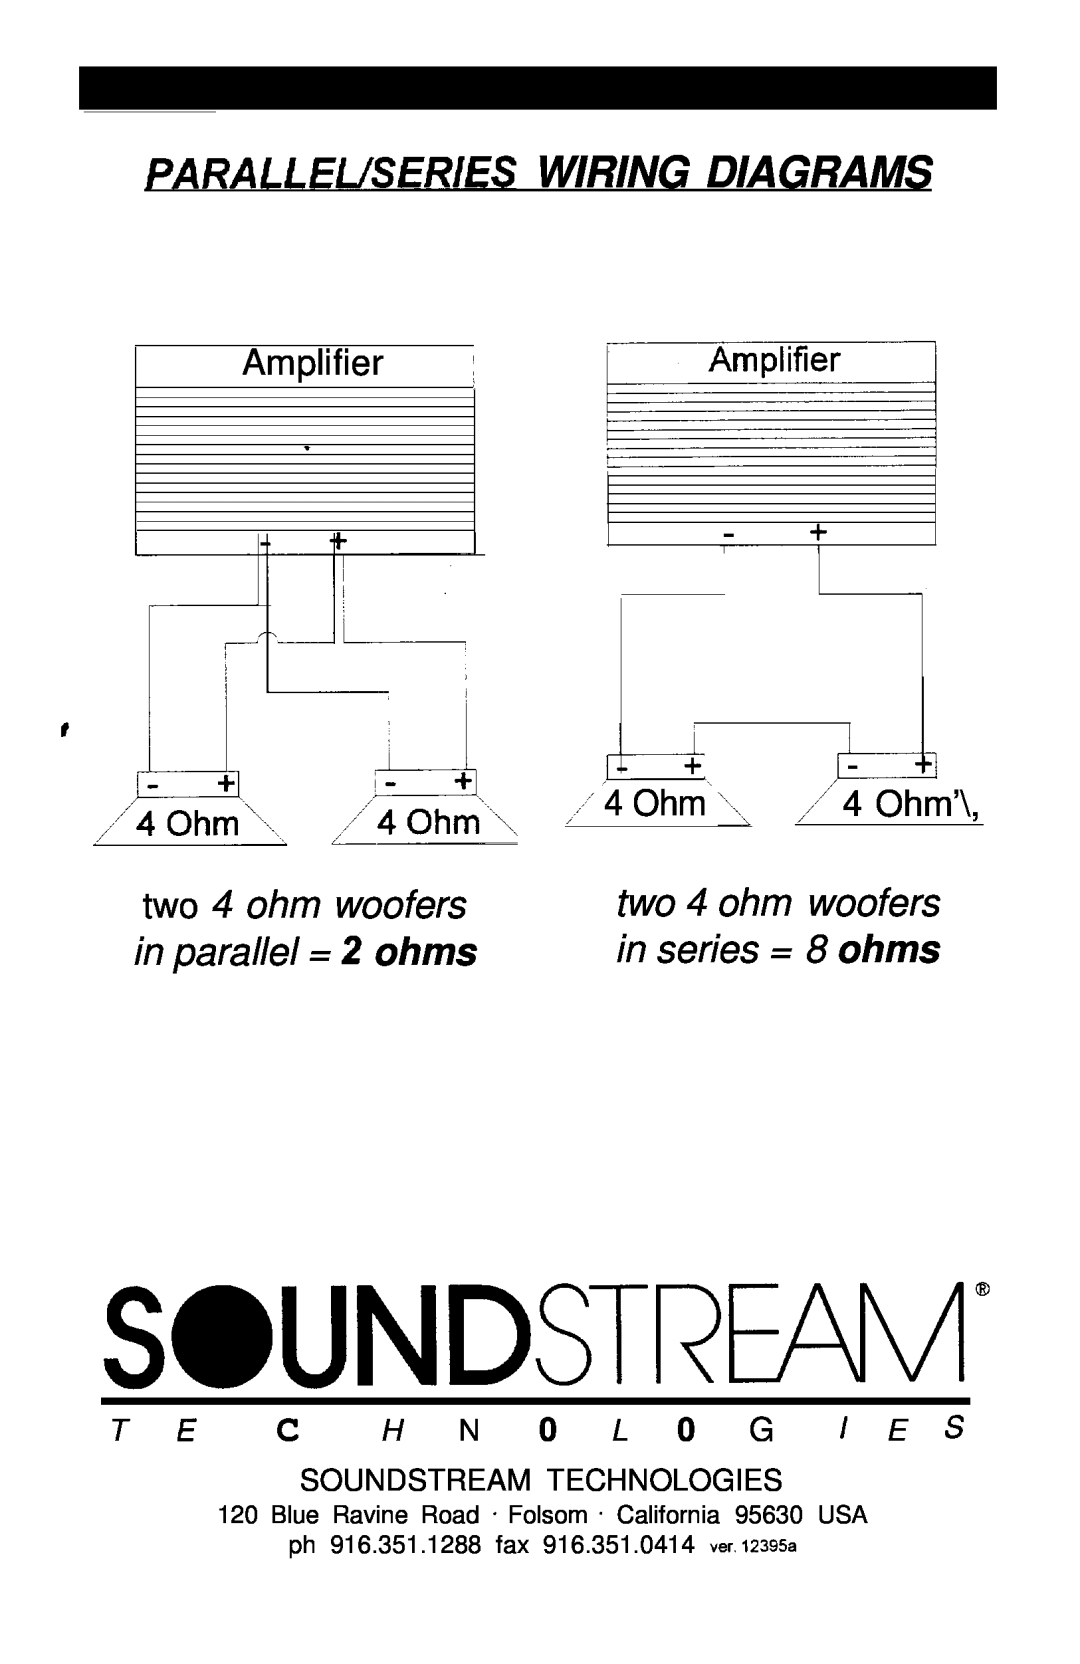 Soundstream Technologies SA 164 T E C H N 0 L 0 G I E S, SOUNDSTREAk/‘@, PARALLEUSERlES WIRING DIAGRAMS, two 4 ohm woofers 